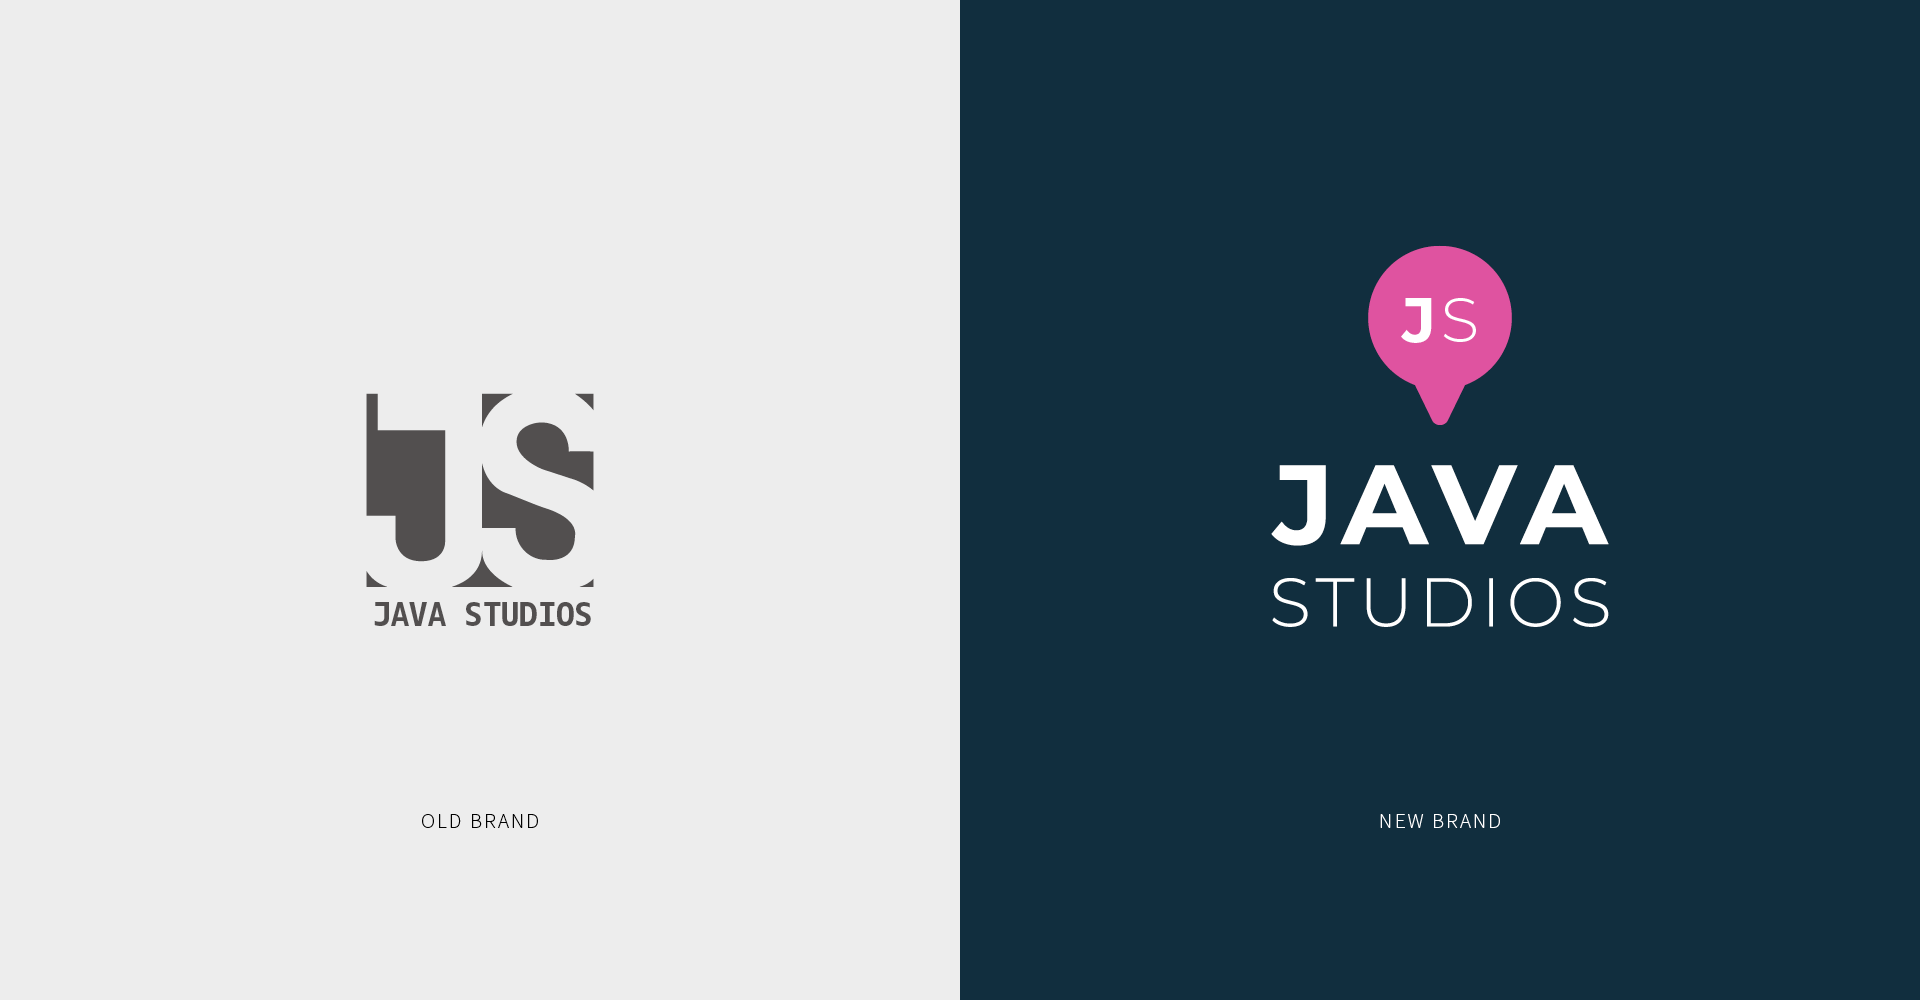 Java Studios logo before and after image